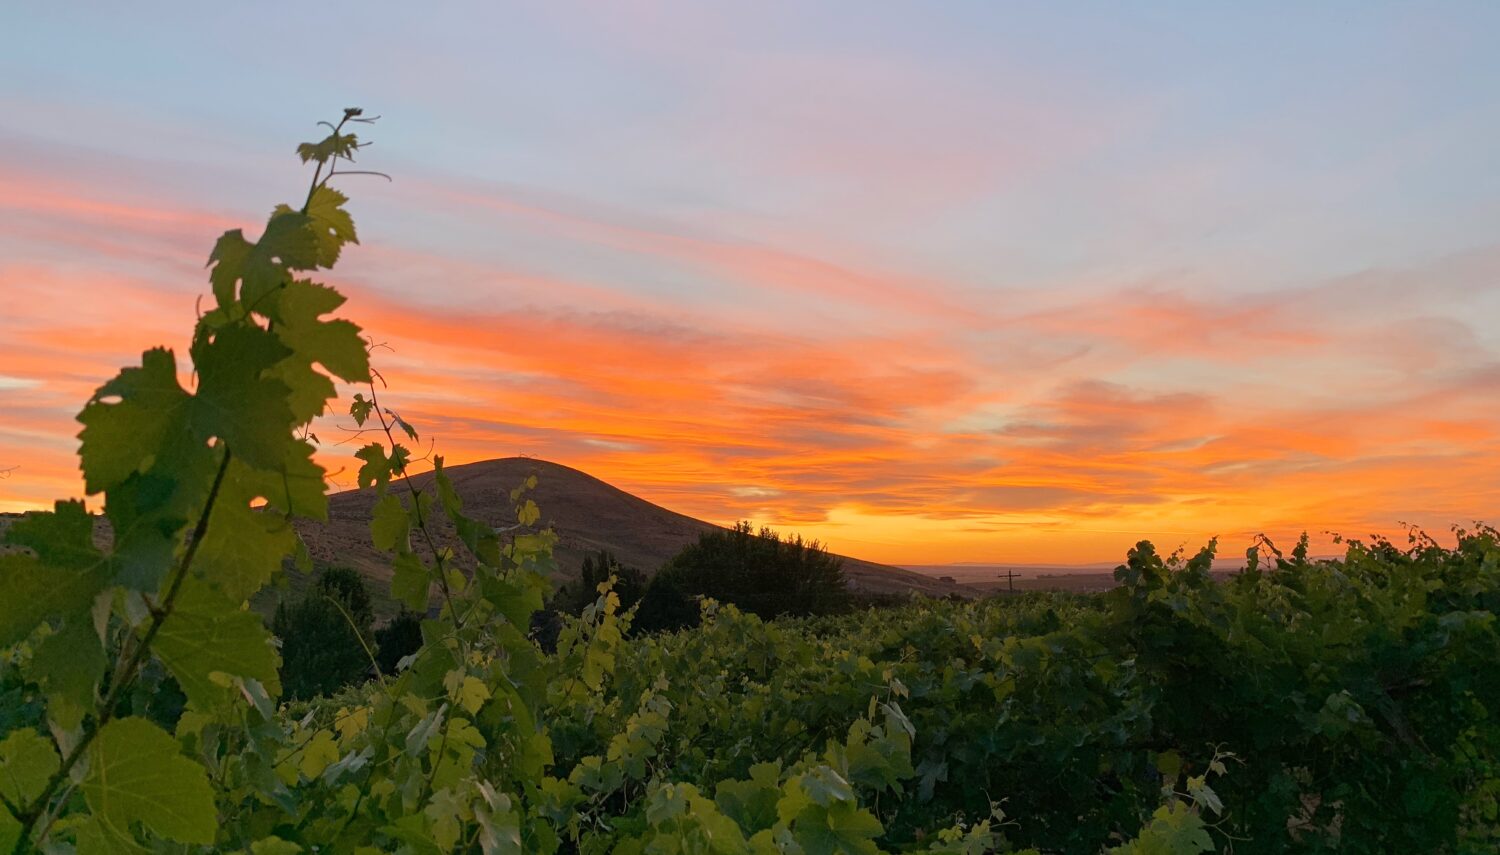 Sunset in orange and gold over a rounded tall hill, with green grape leaves in the foreground.